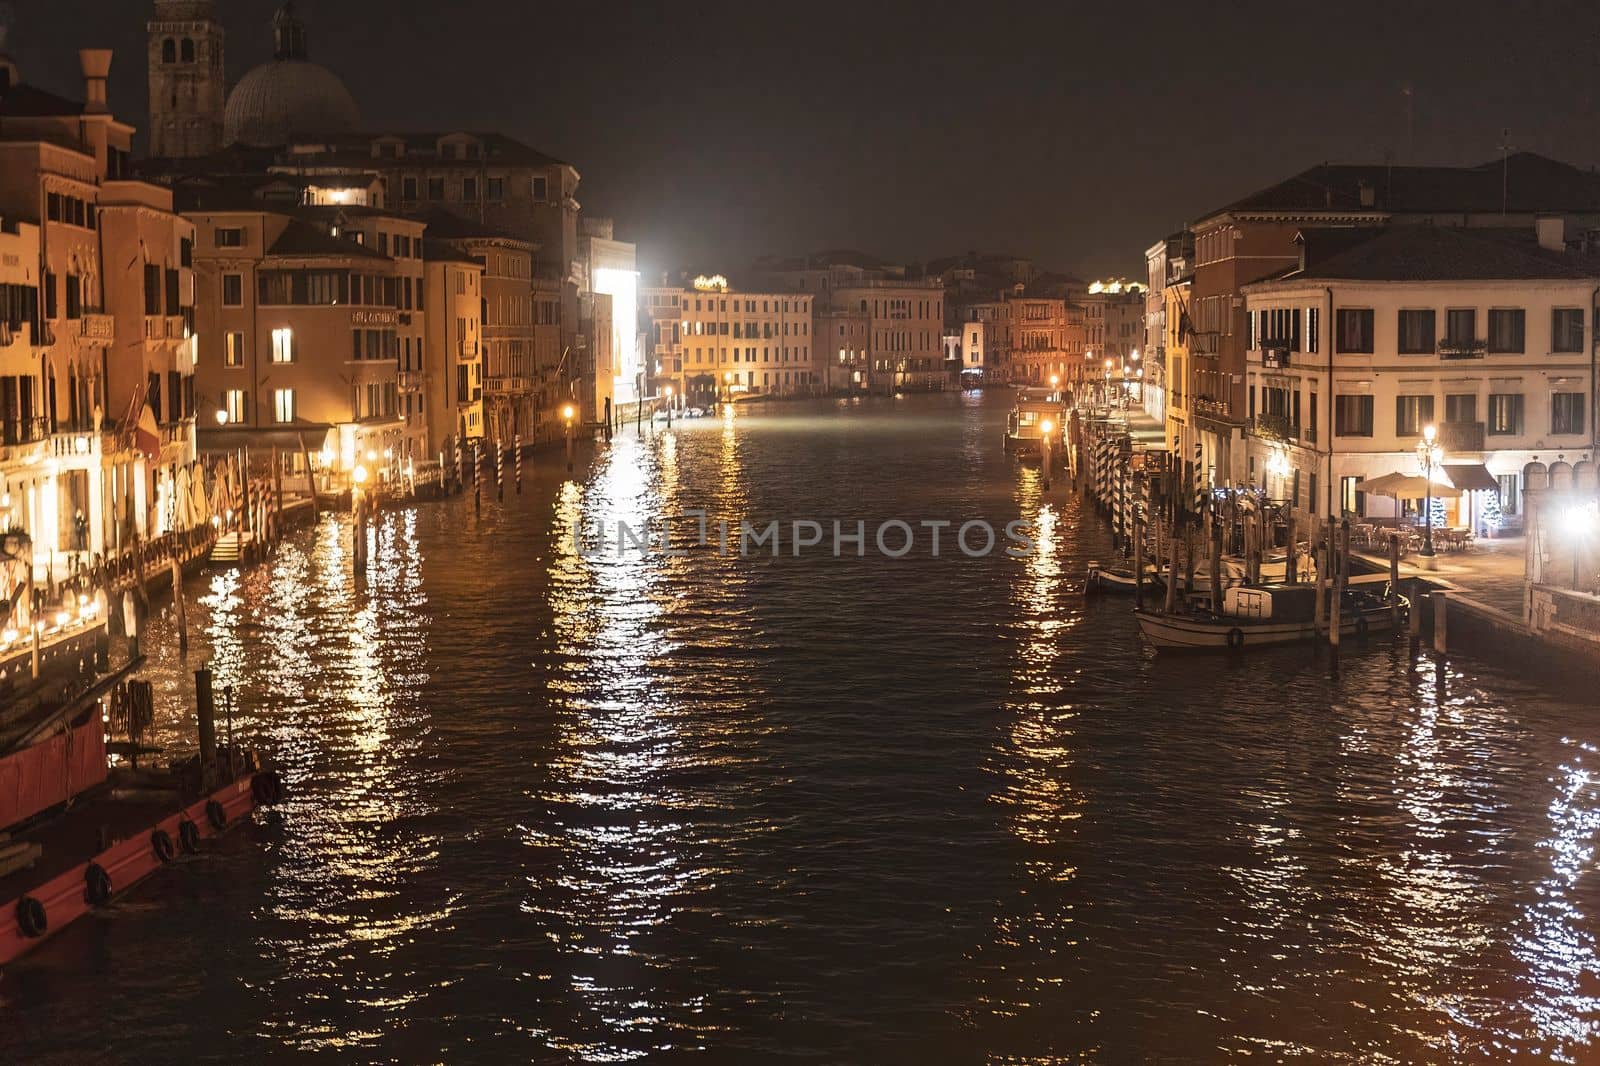 Venice landscape at dusk and night time by pippocarlot